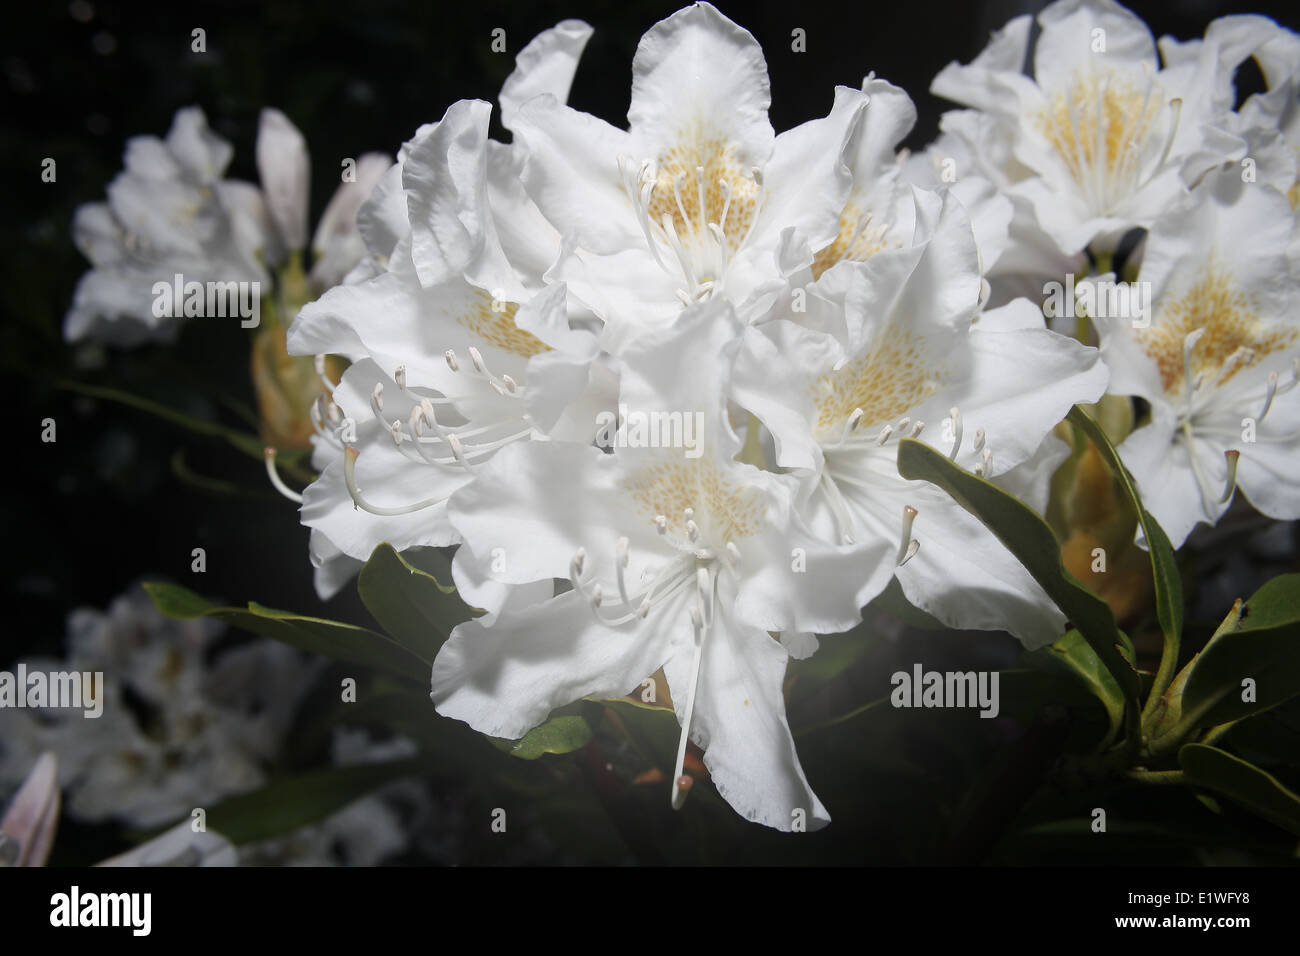 close up image of white rhododendron flowers Stock Photo